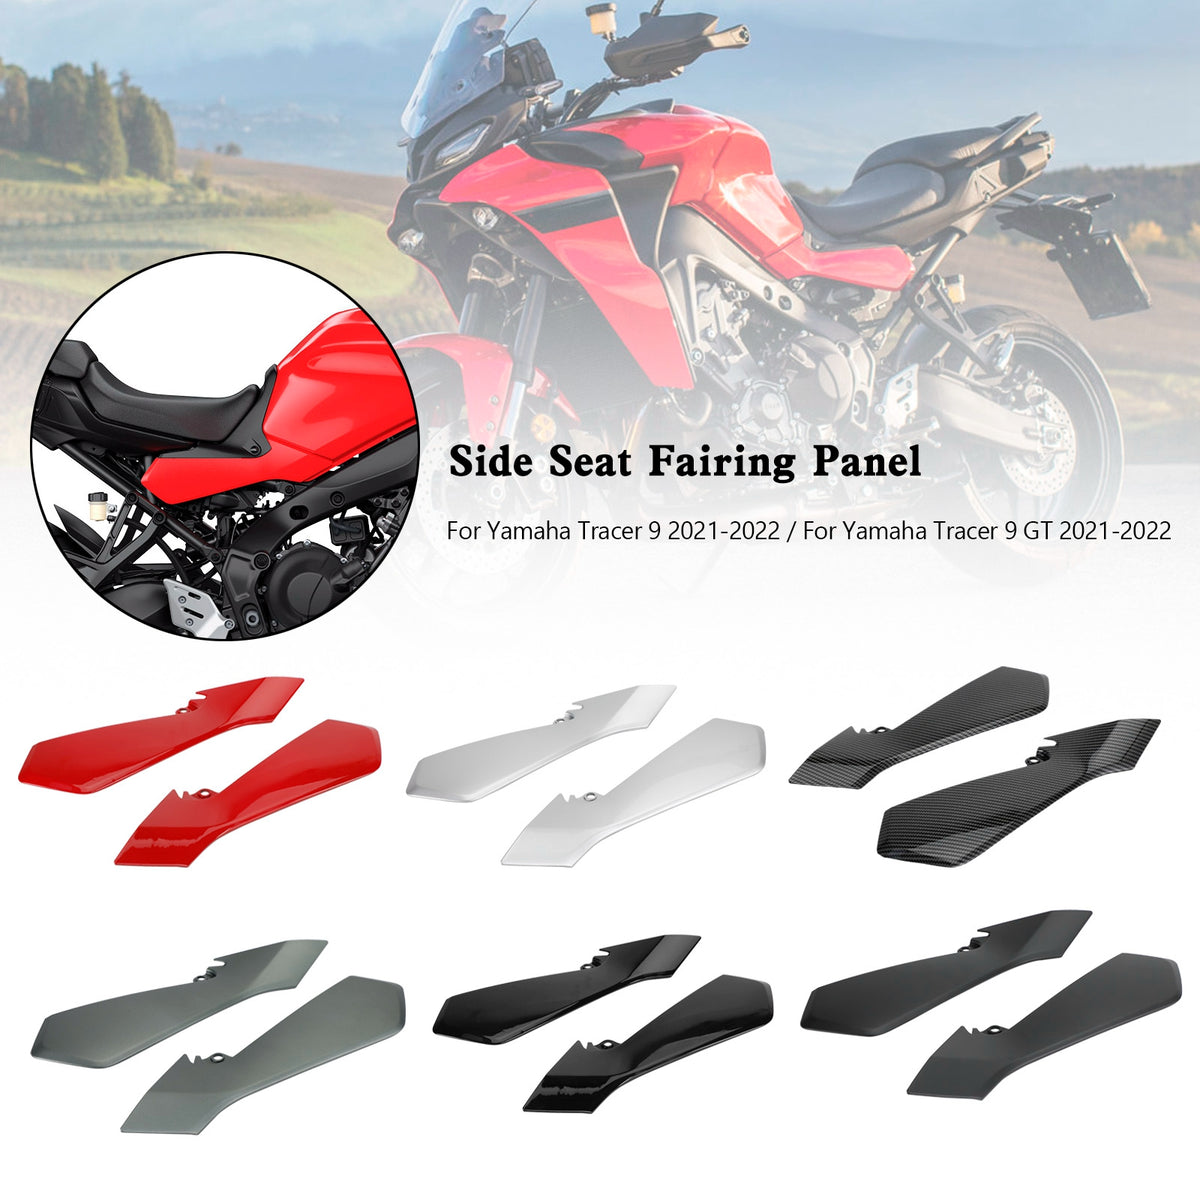 Rear Tail Side Seat Fairing Panel Cowl For Yamaha Tracer 9 GT 2021-2022